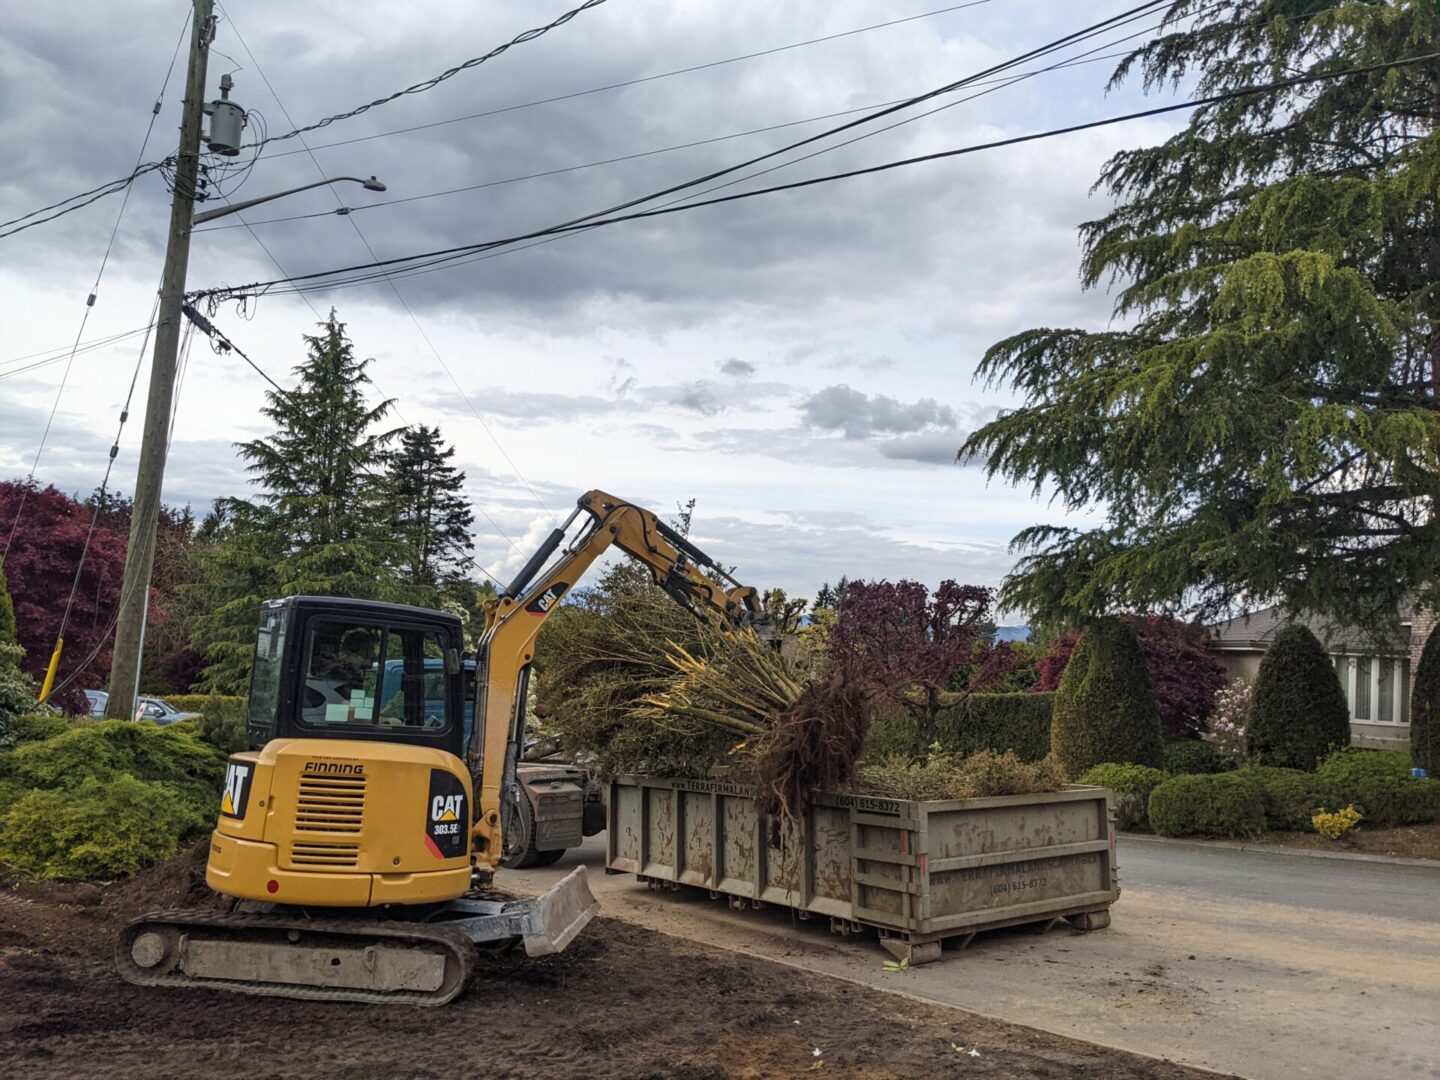 A yellow excavator loading debris into a dumpster on a suburban street, surrounded by lush greenery and various trees.